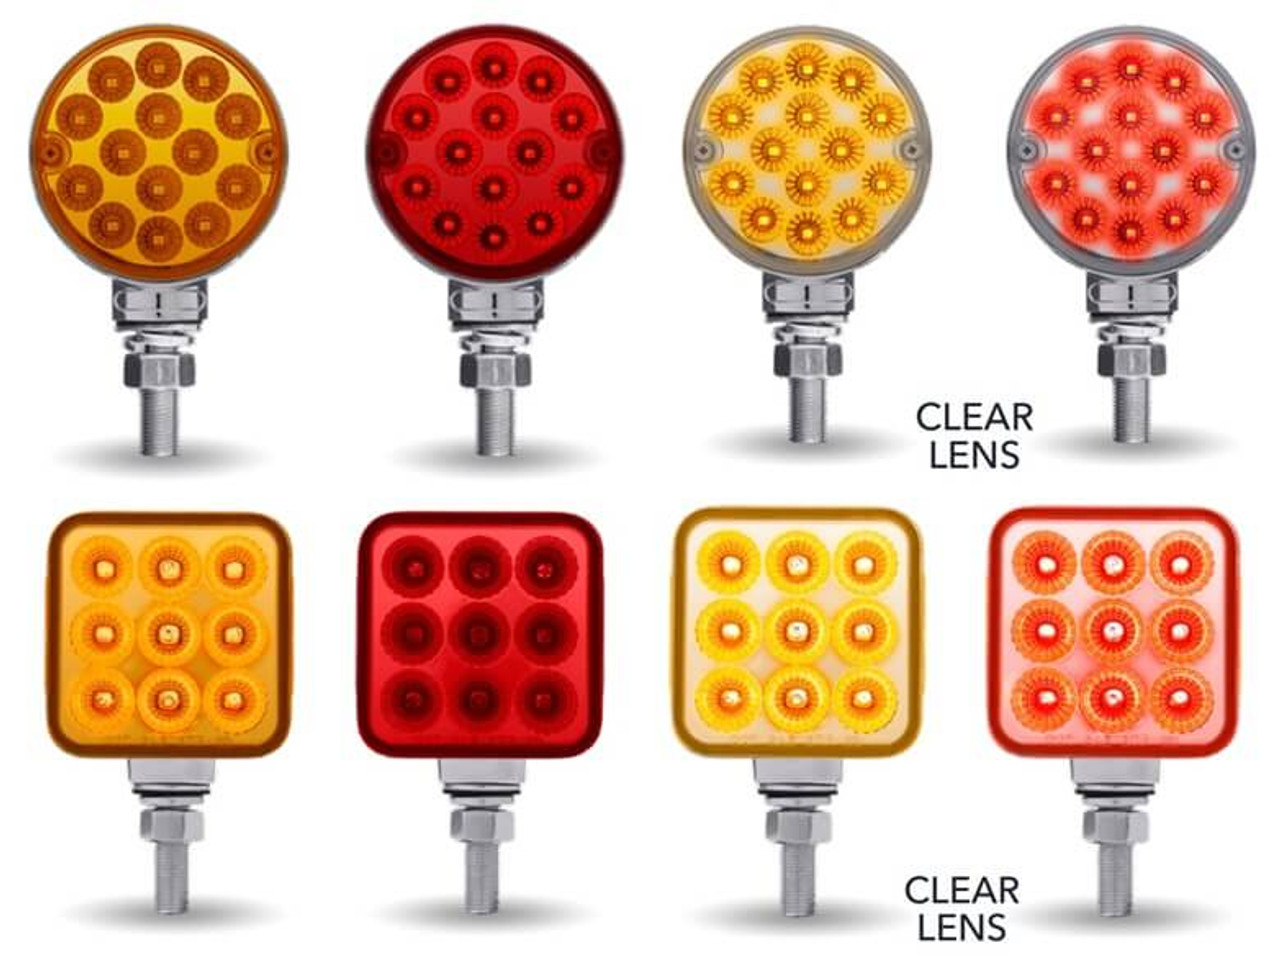 3" Mini Round or Square Double Face Amber/Red LED Pedestal Light with Chrome Reflector - Single Post